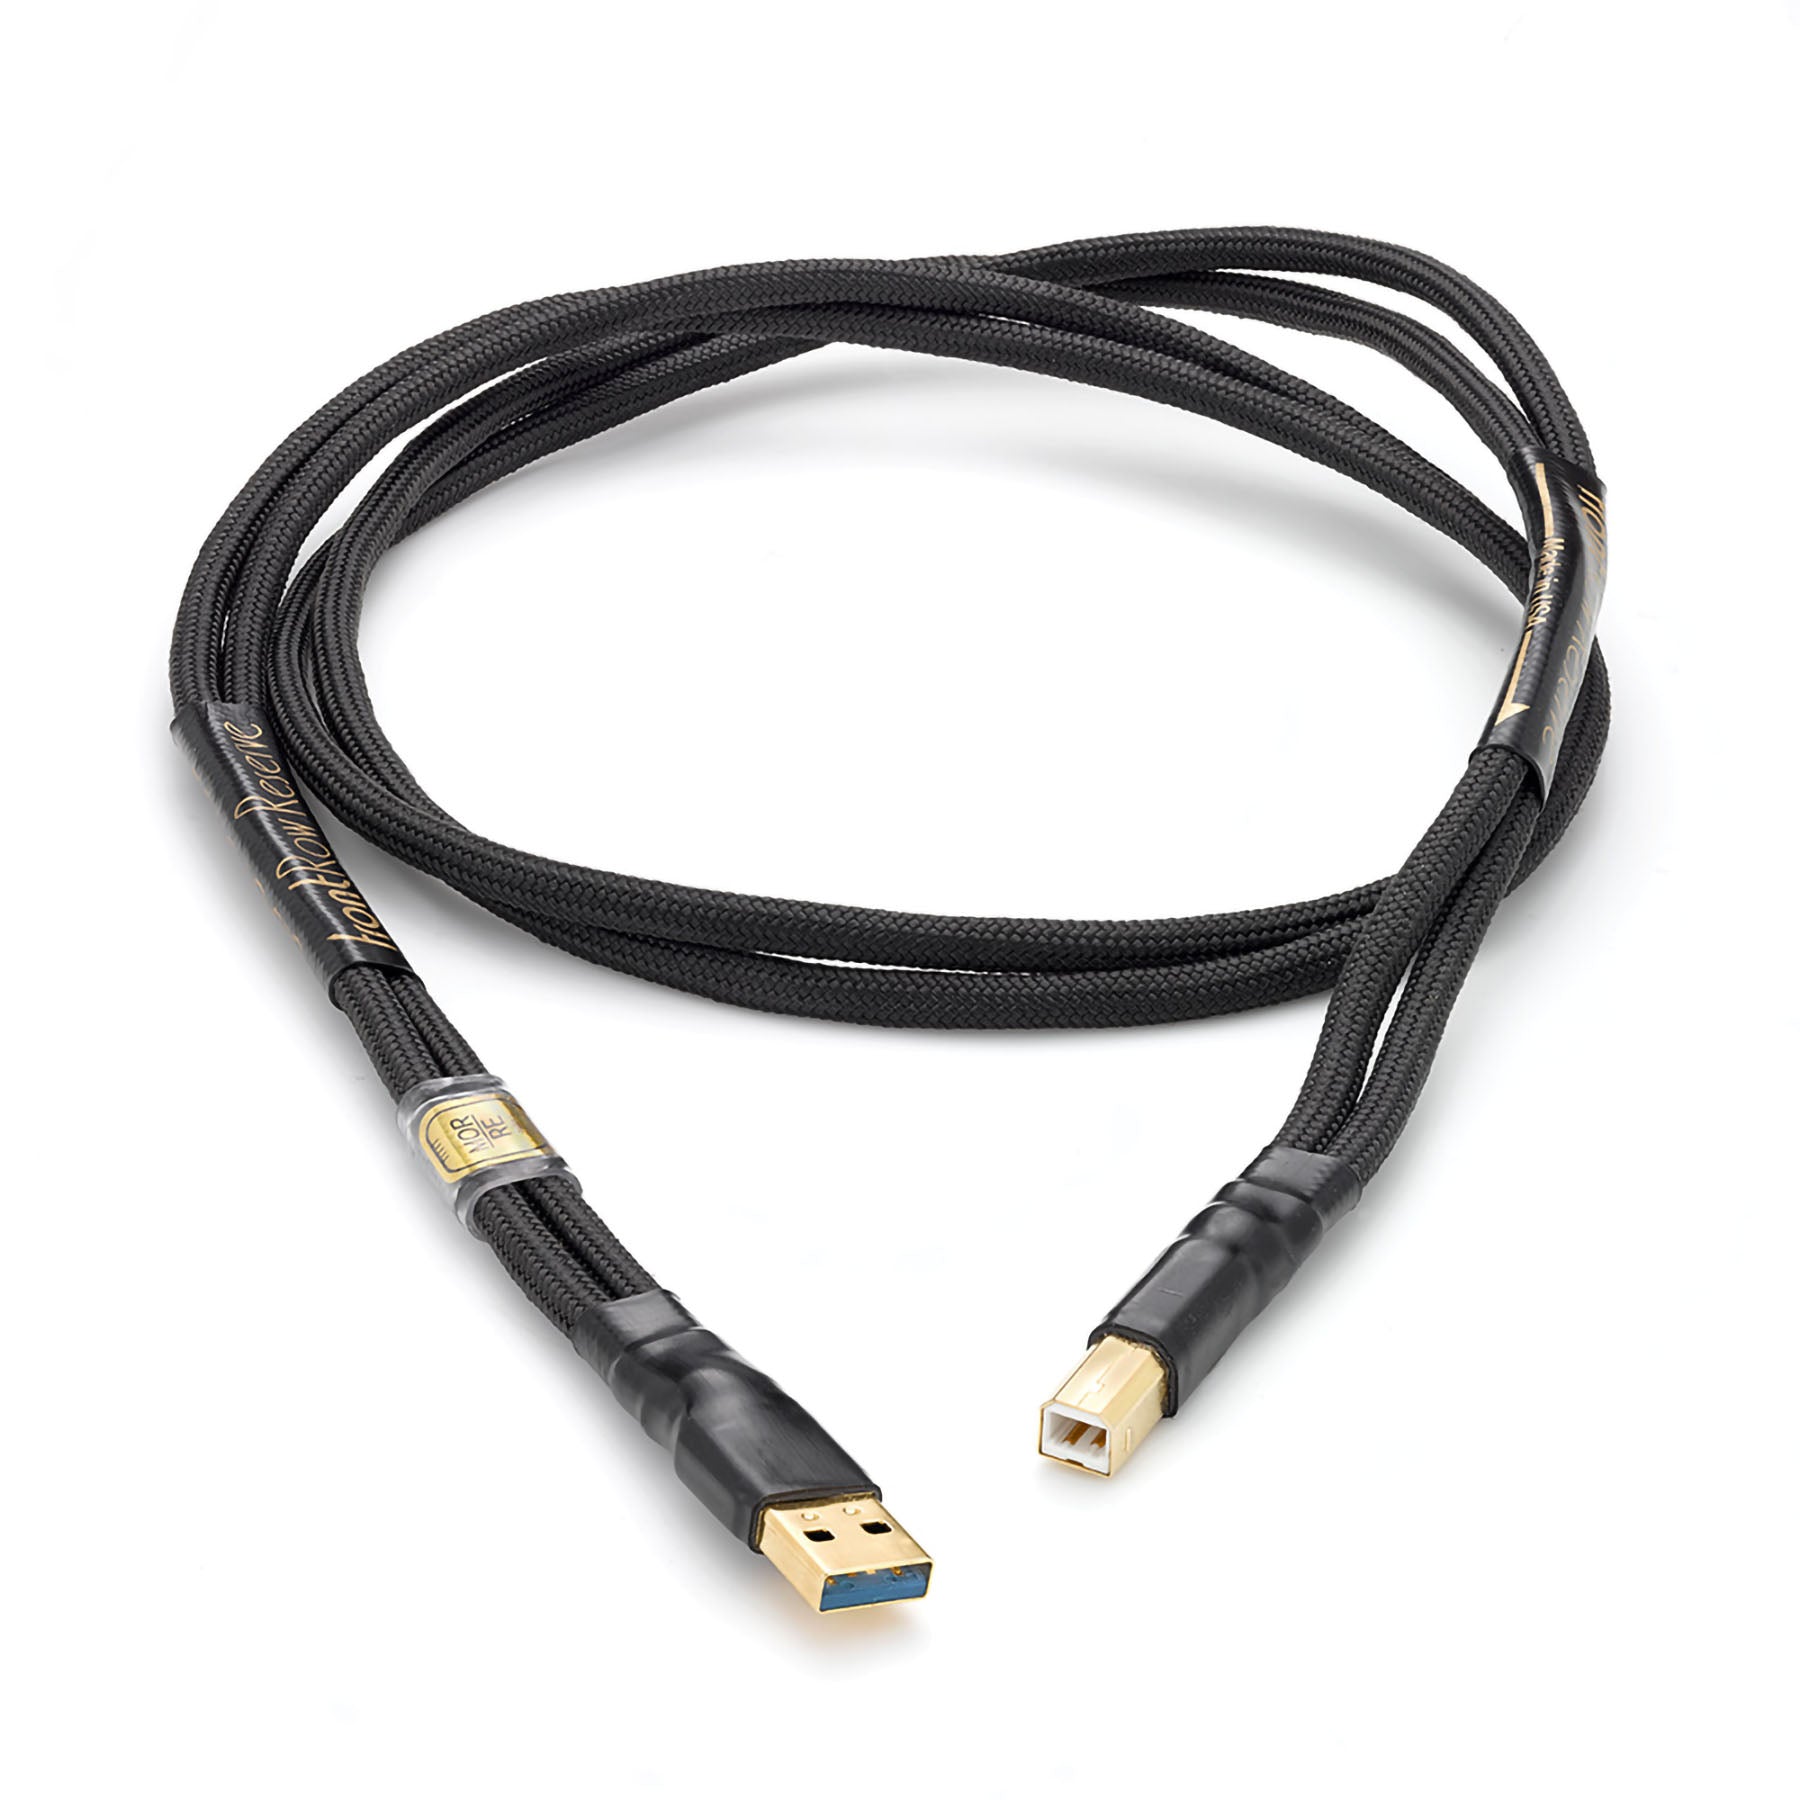 Audience frontRow Reserve USB Digital Interconnect Cable